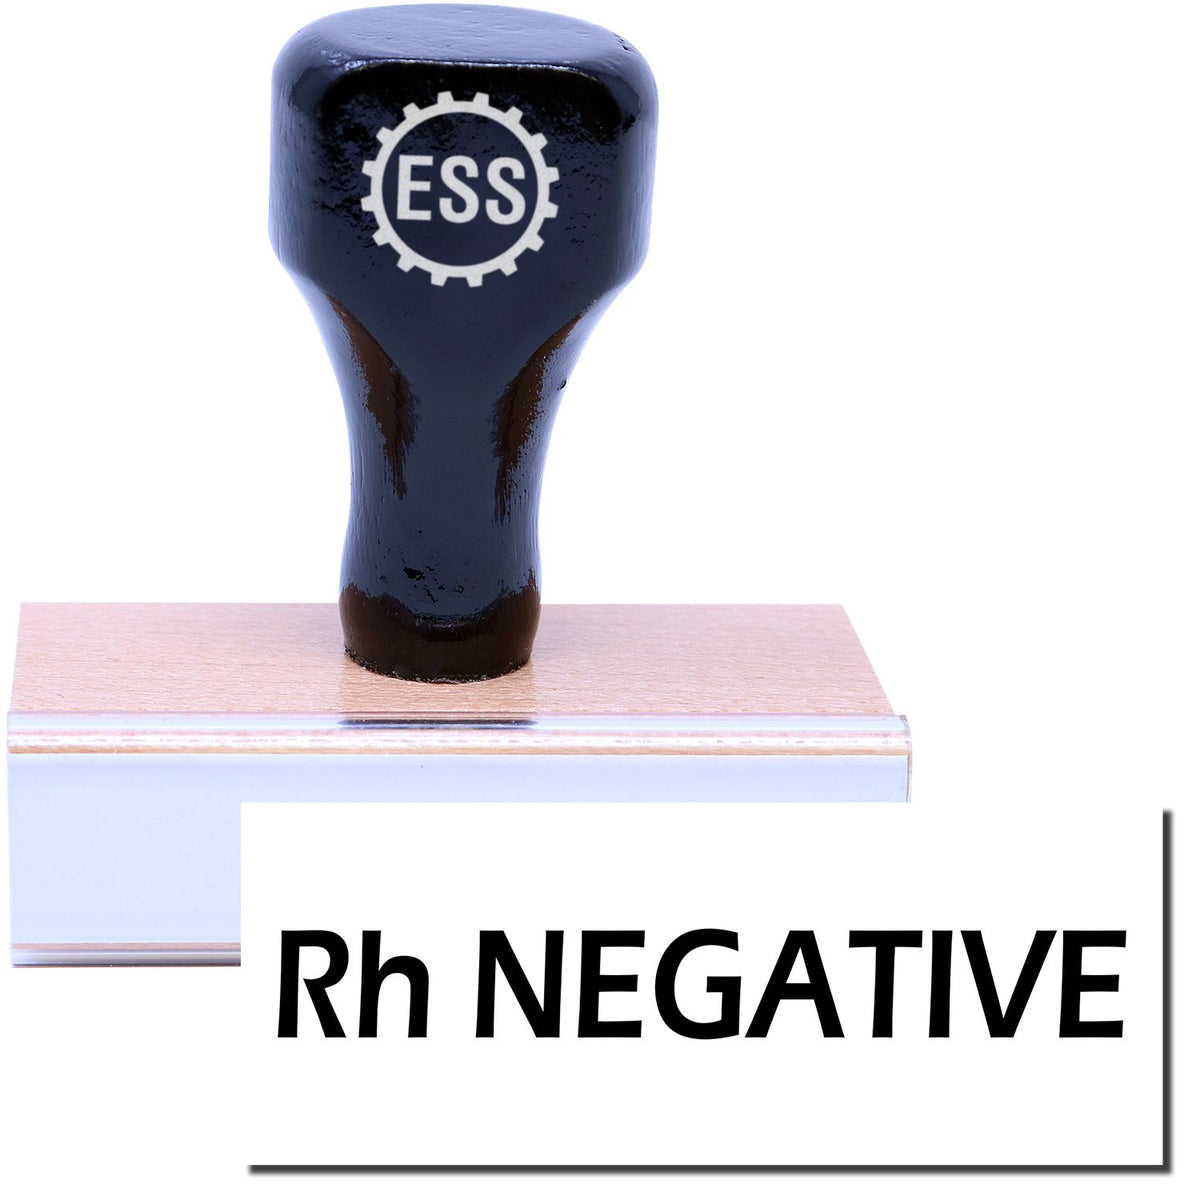 A stock office rubber stamp with a stamped image showing how the text &quot;Rh NEGATIVE&quot; in a large font is displayed after stamping.